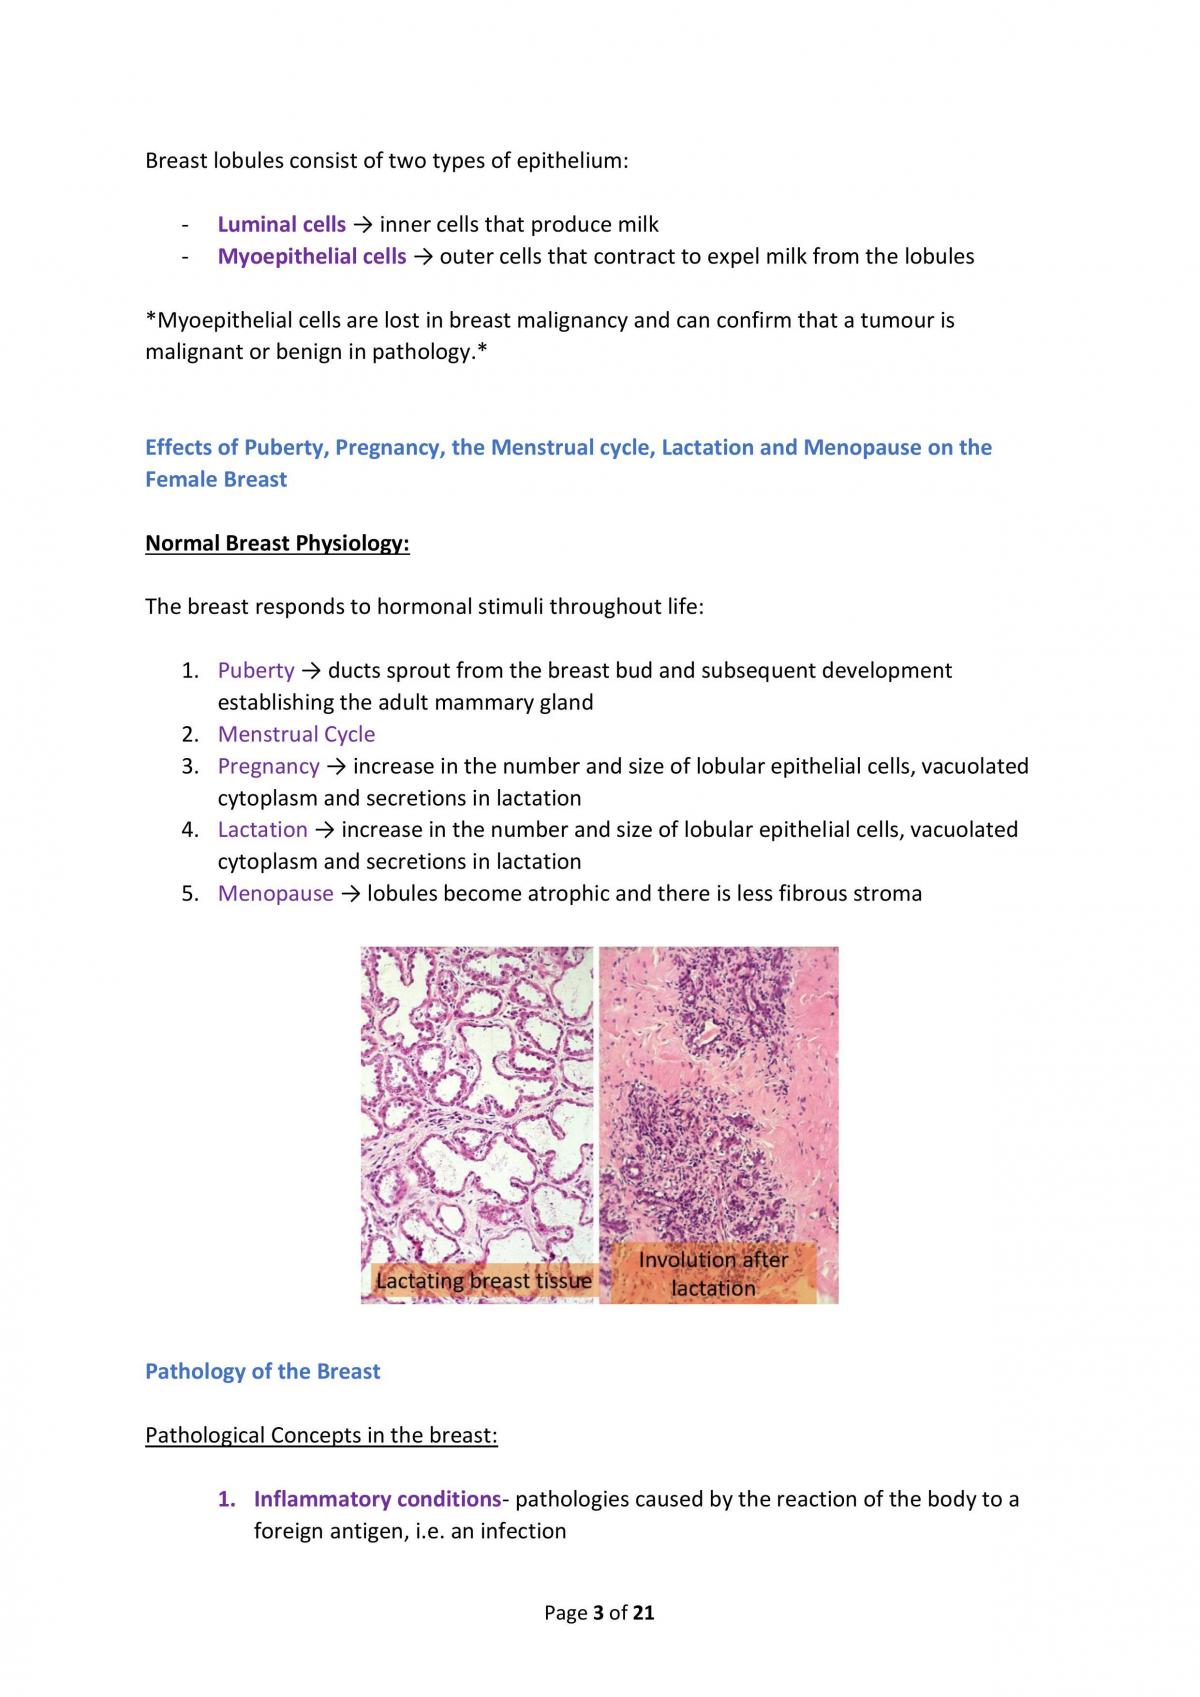 Breast Pathology Notes - Page 3